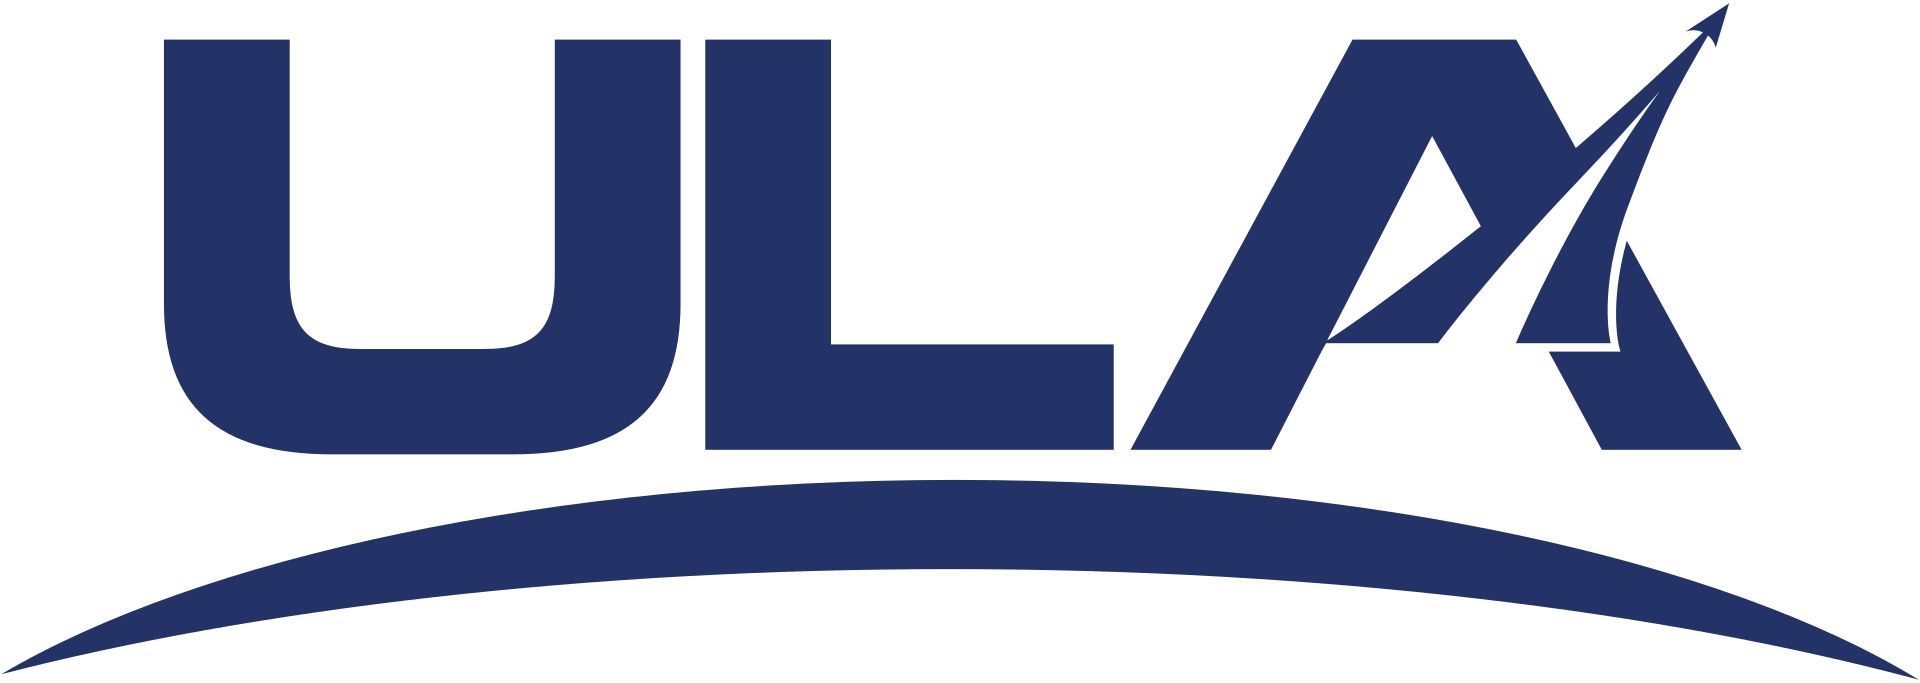 The logo of United Launch Alliance.